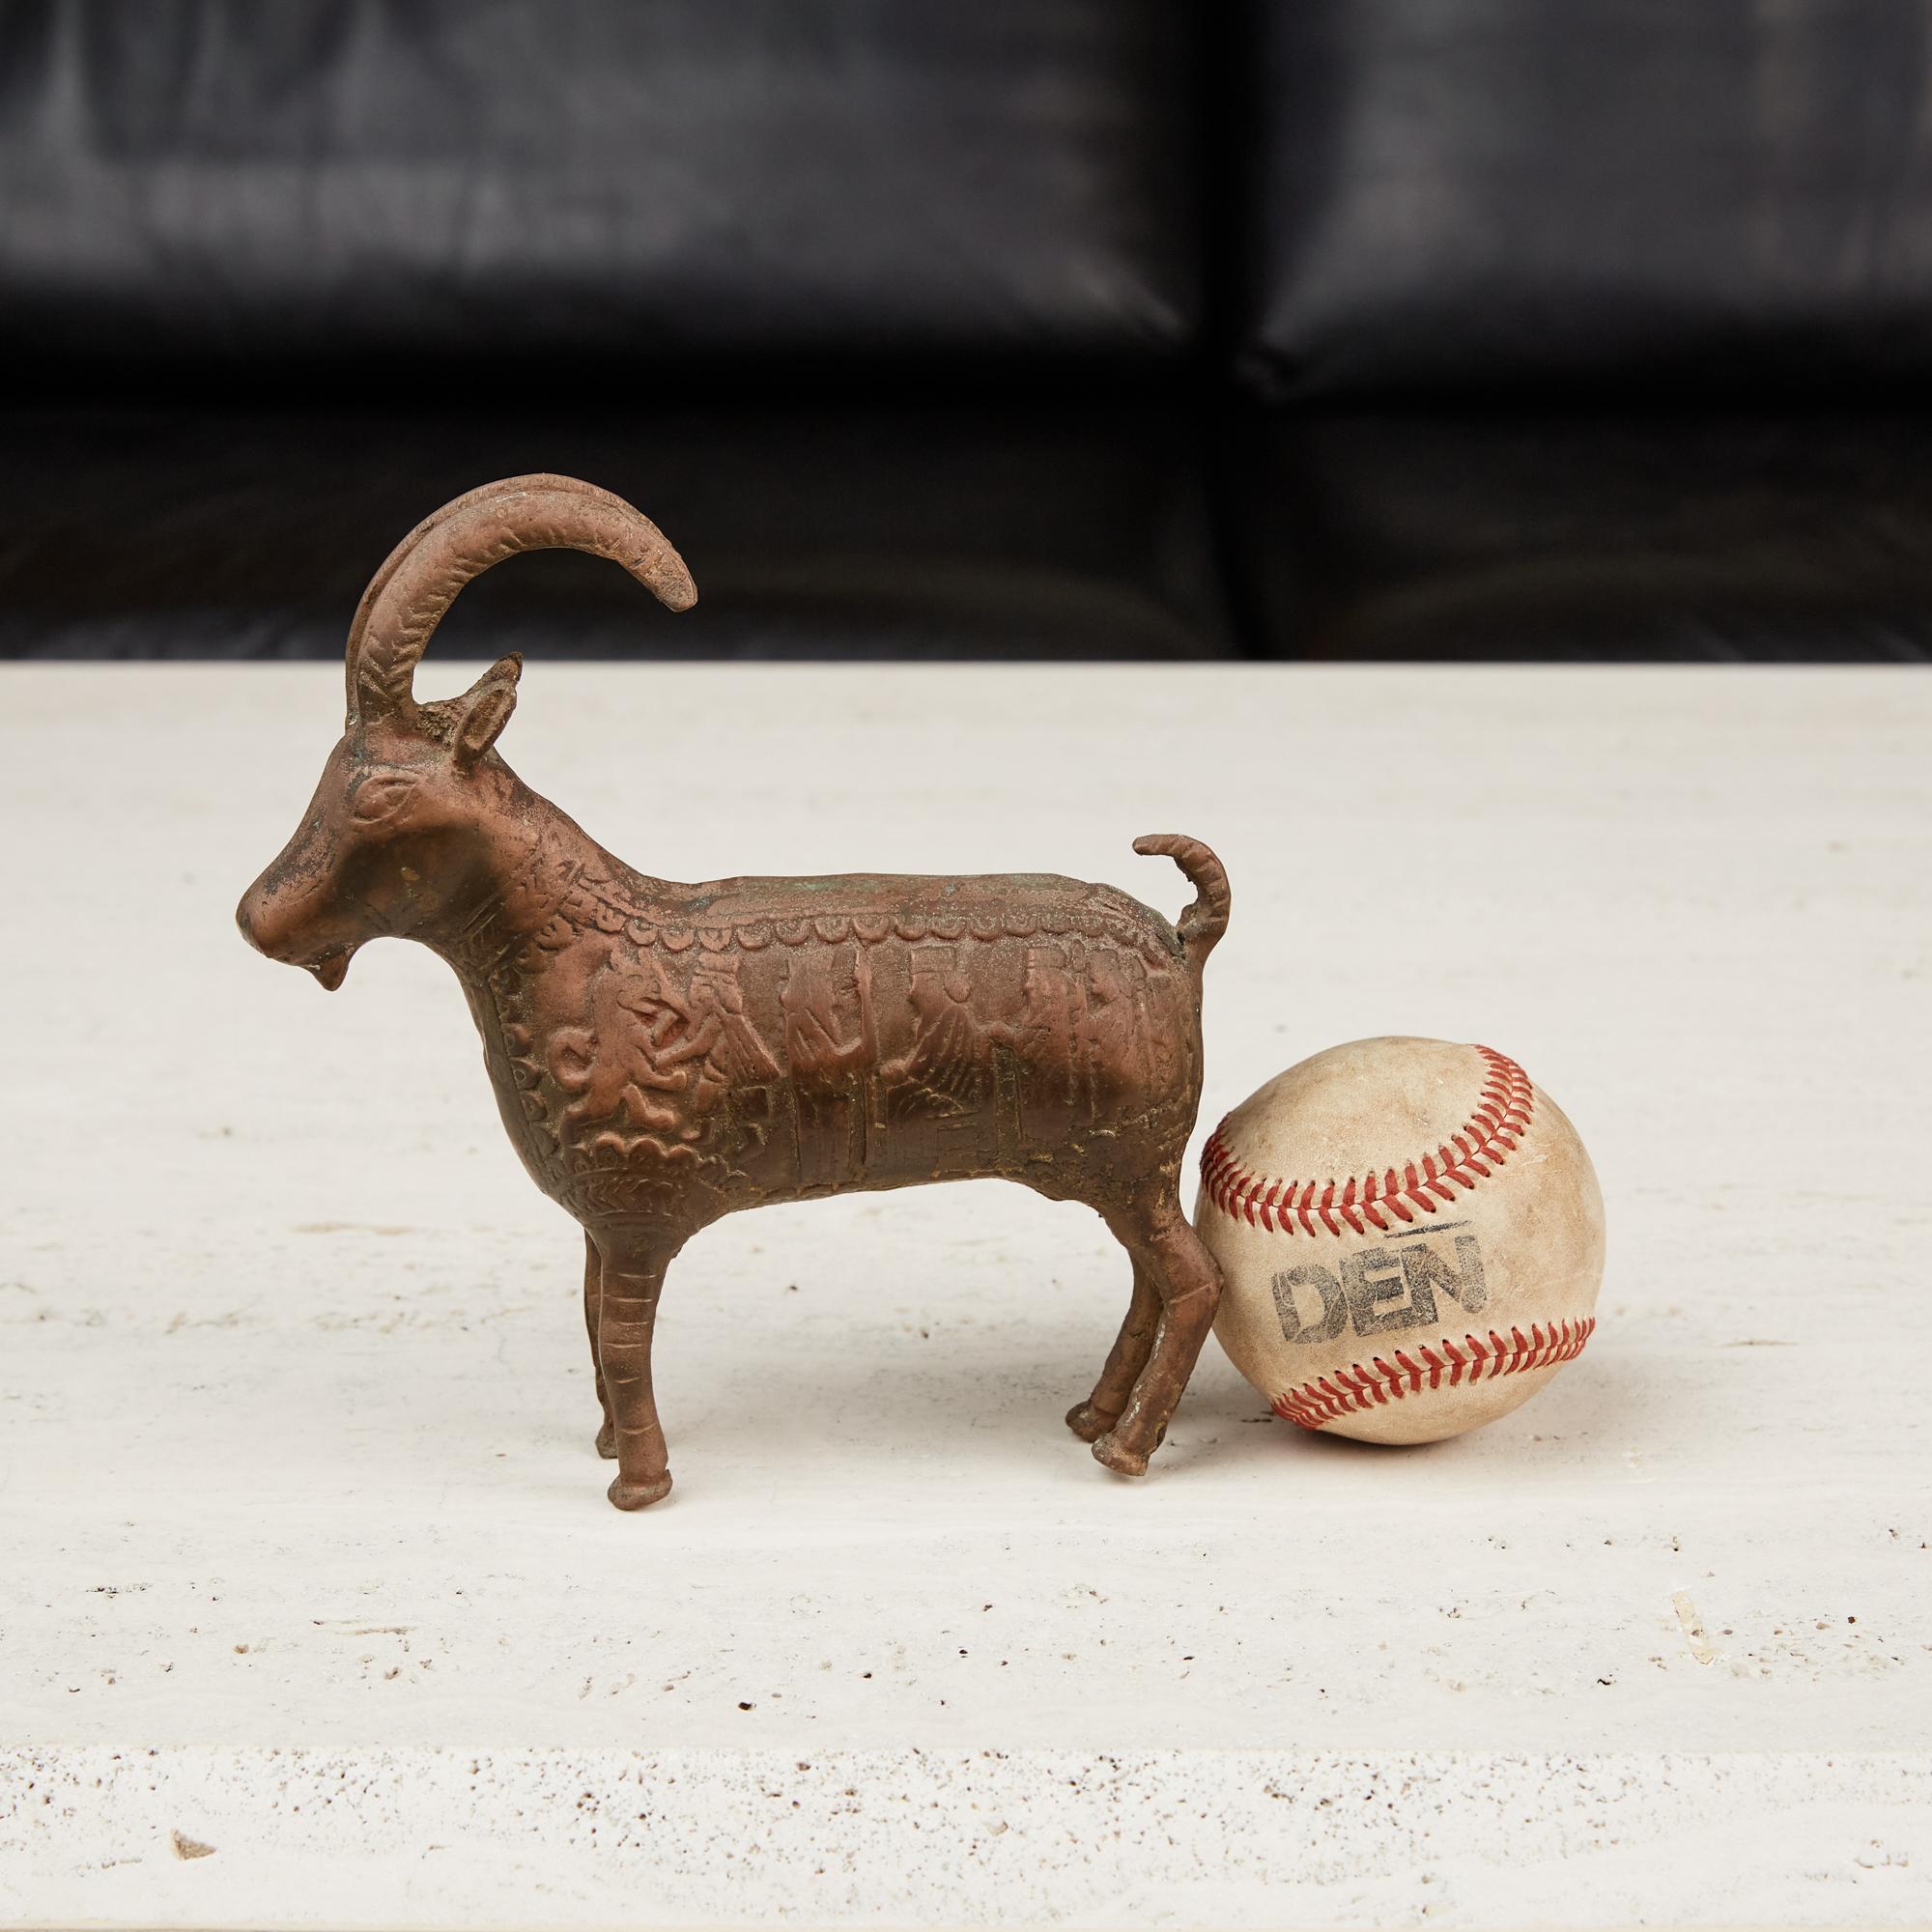 Patinated bronze ram figure featuring a hieroglyphic pattern on both sides of the body of the figure. It is the perfect accessory for your shelf or curio cabinet.

Dimensions: 6.75” width x 2” depth x 7” height.

Condition: Excellent vintage